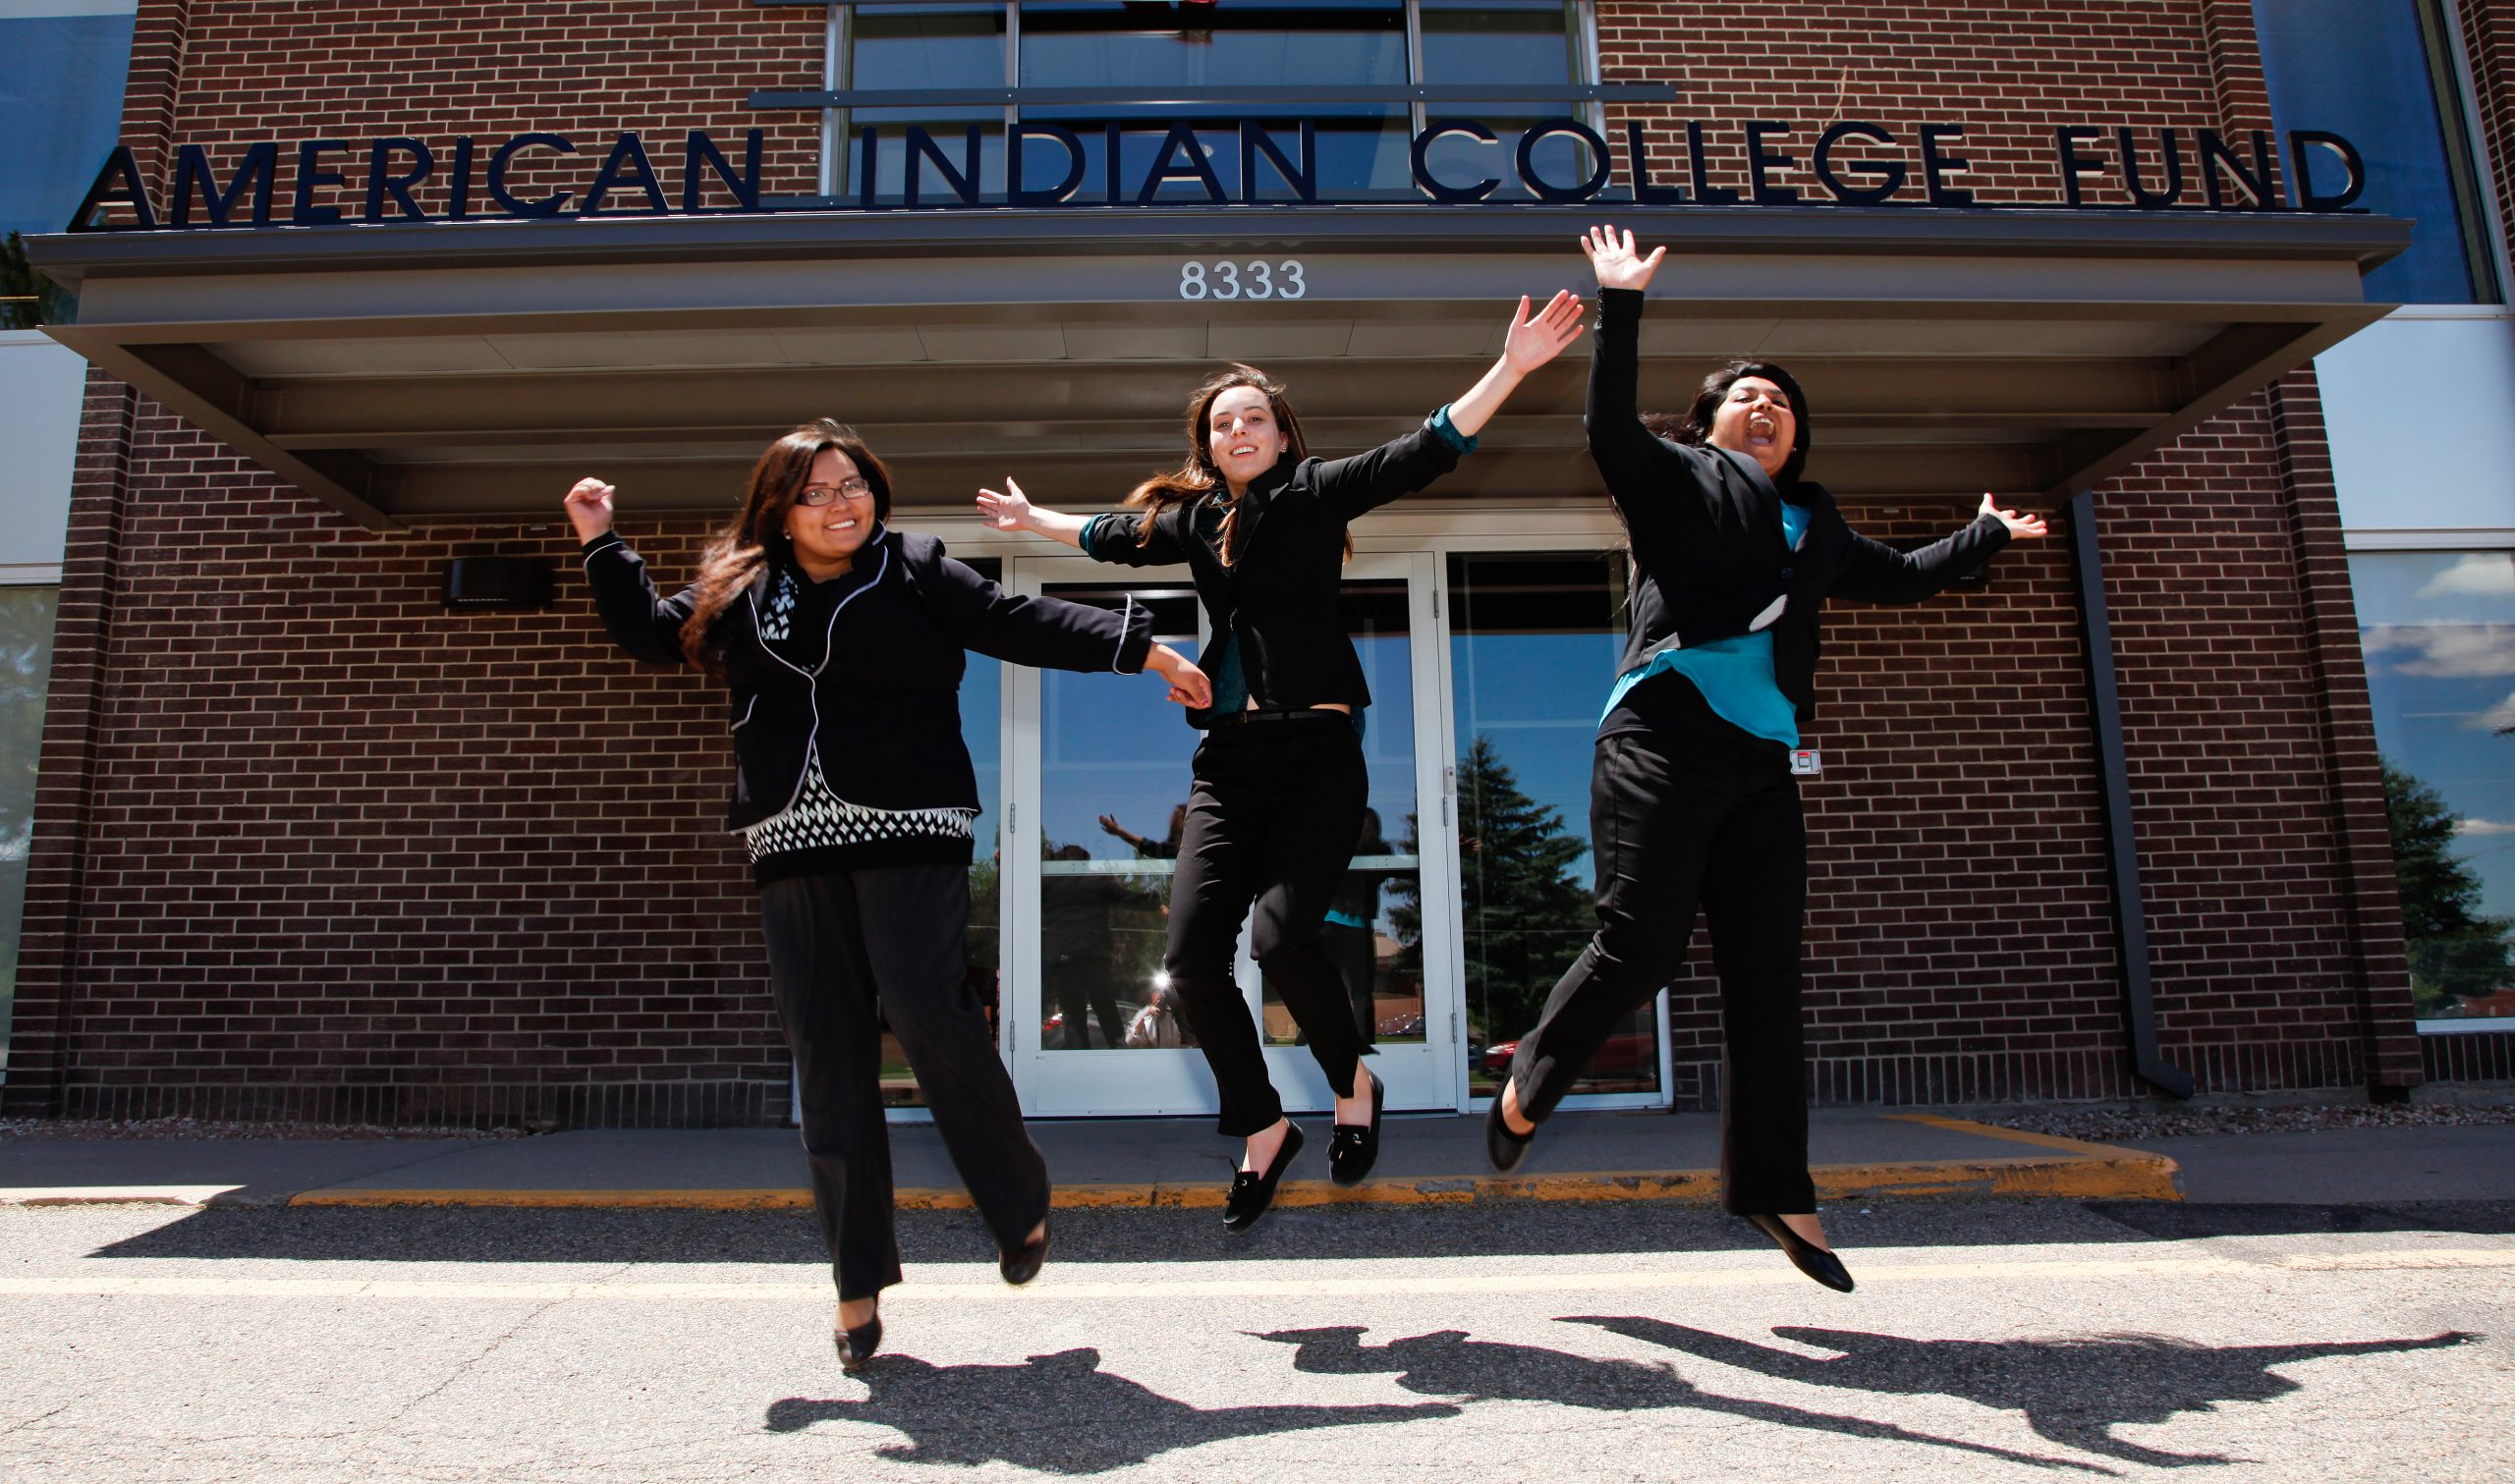 The Interns take a jumping pose in front of the American Indian College Fund